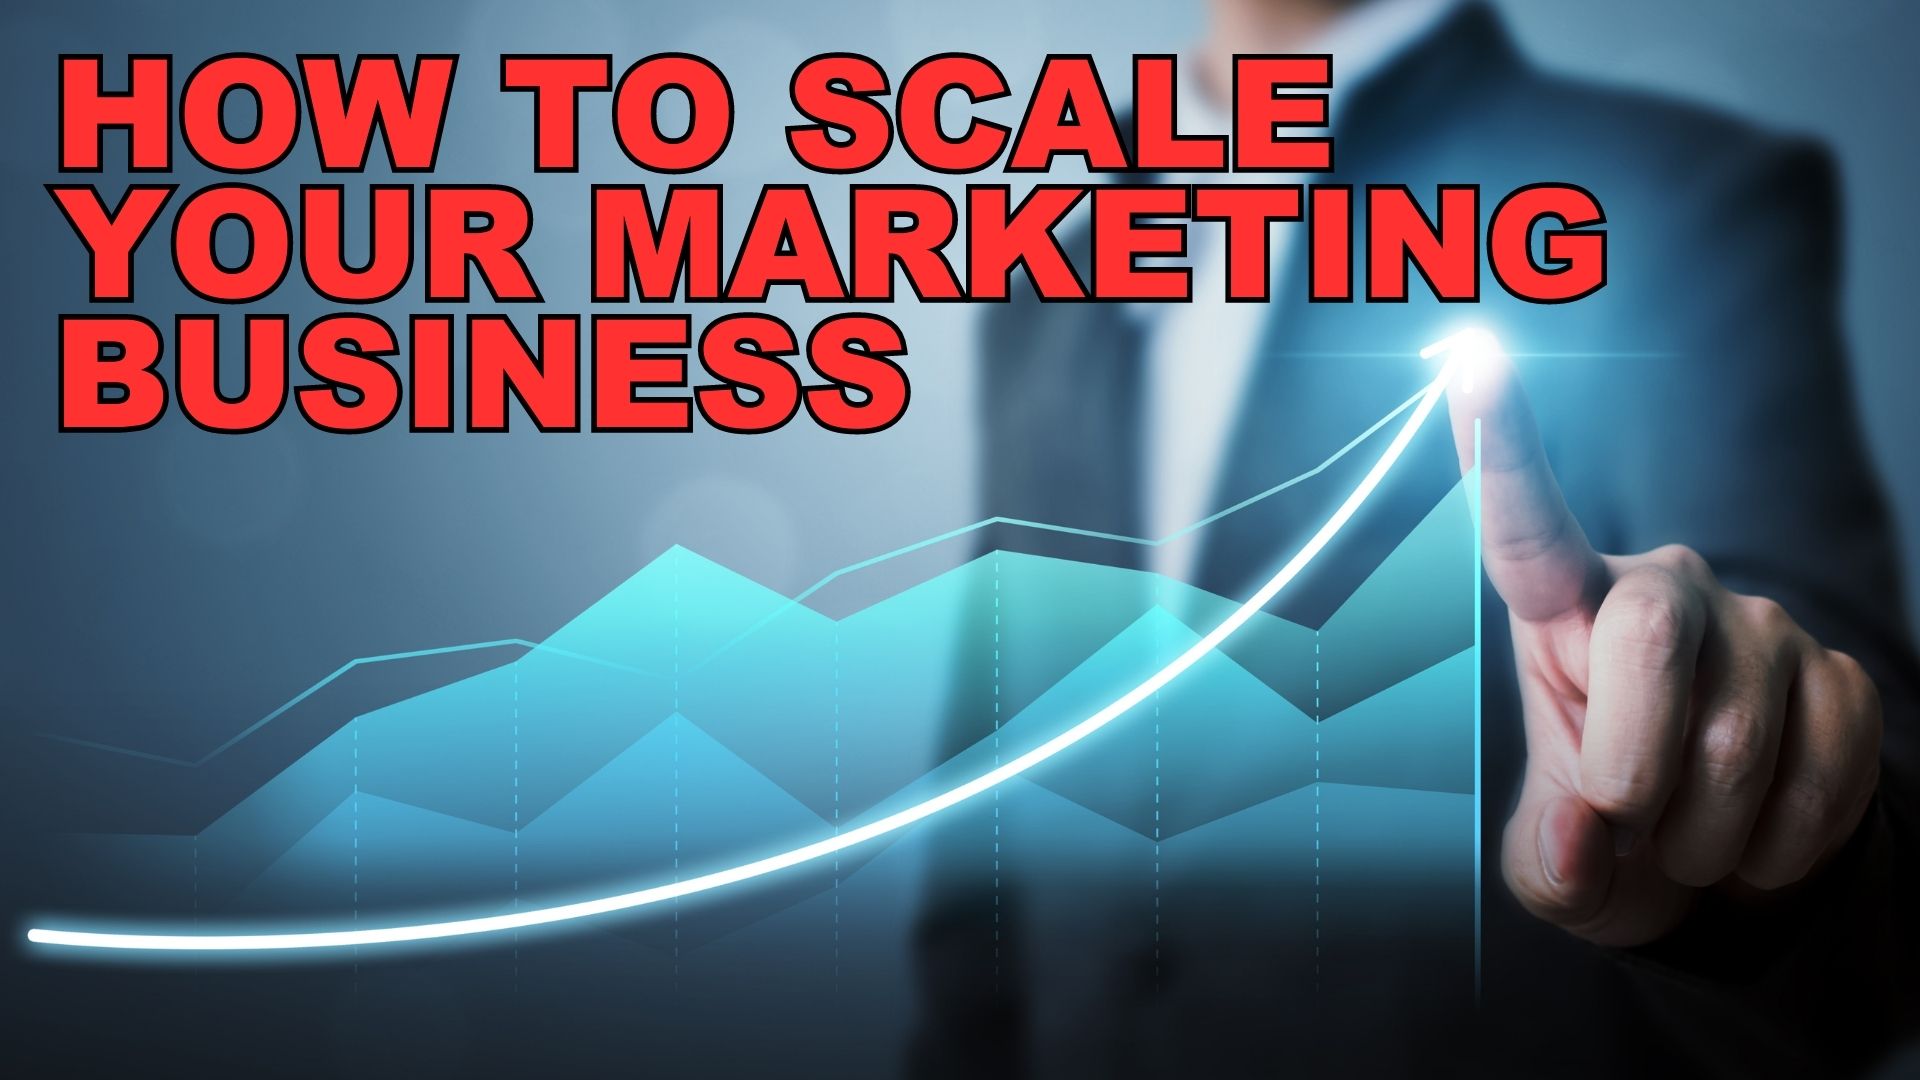 How-to-Scale-an-Agency-with-Tyler-Narducci-All-About-Digital-Marketing-Podcast.jpg